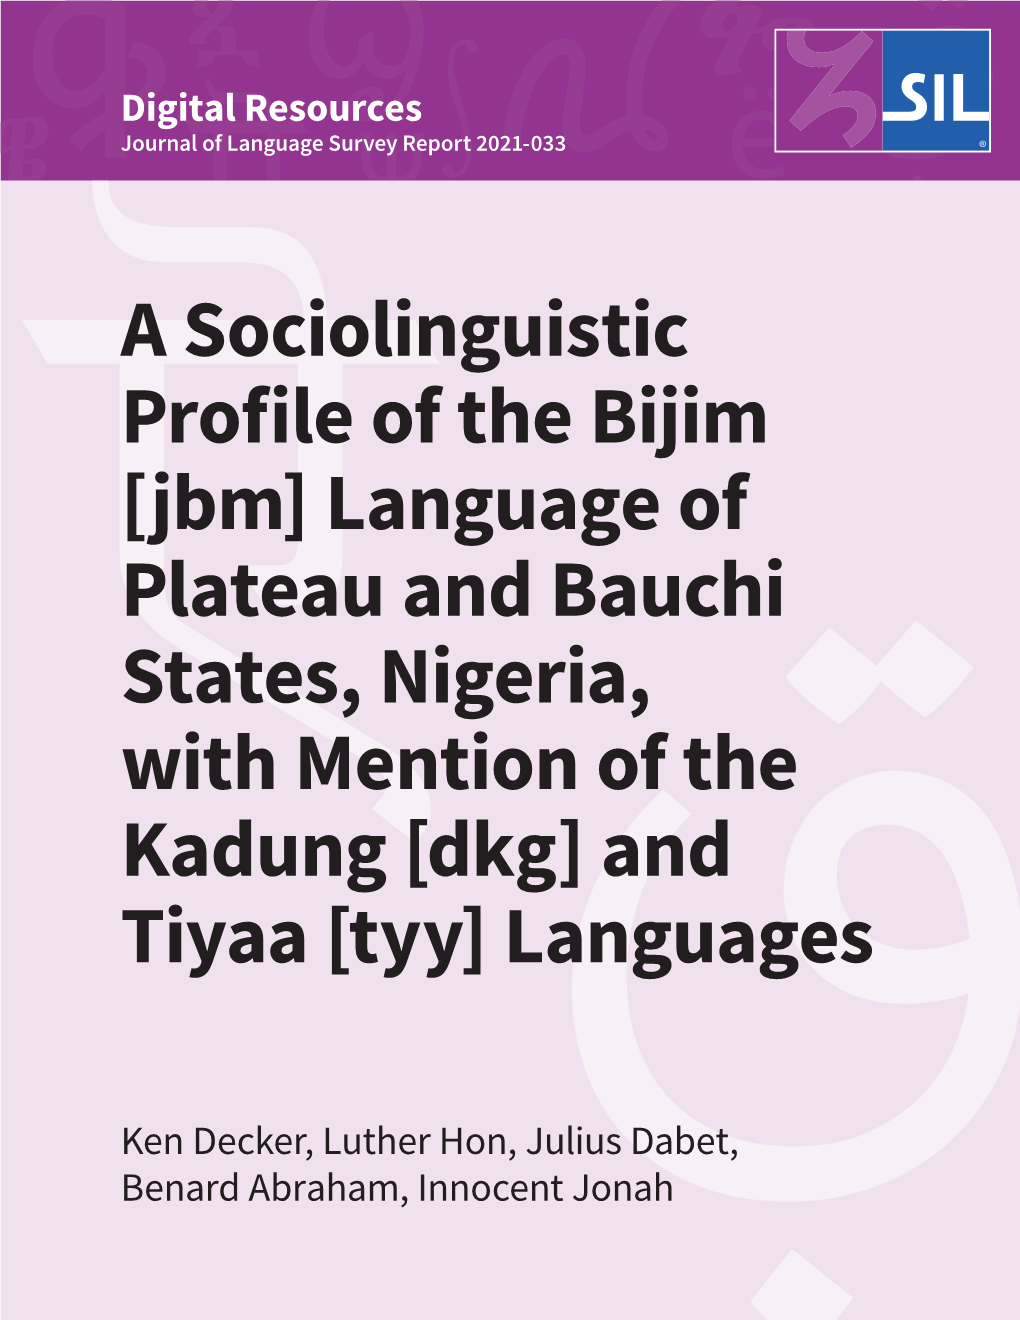 A Sociolinguistic Profile of the Bijim [Jbm] Language of Plateau and Bauchi States, Nigeria, with Mention of the Kadung [Dkg] and Tiyaa [Tyy] Languages